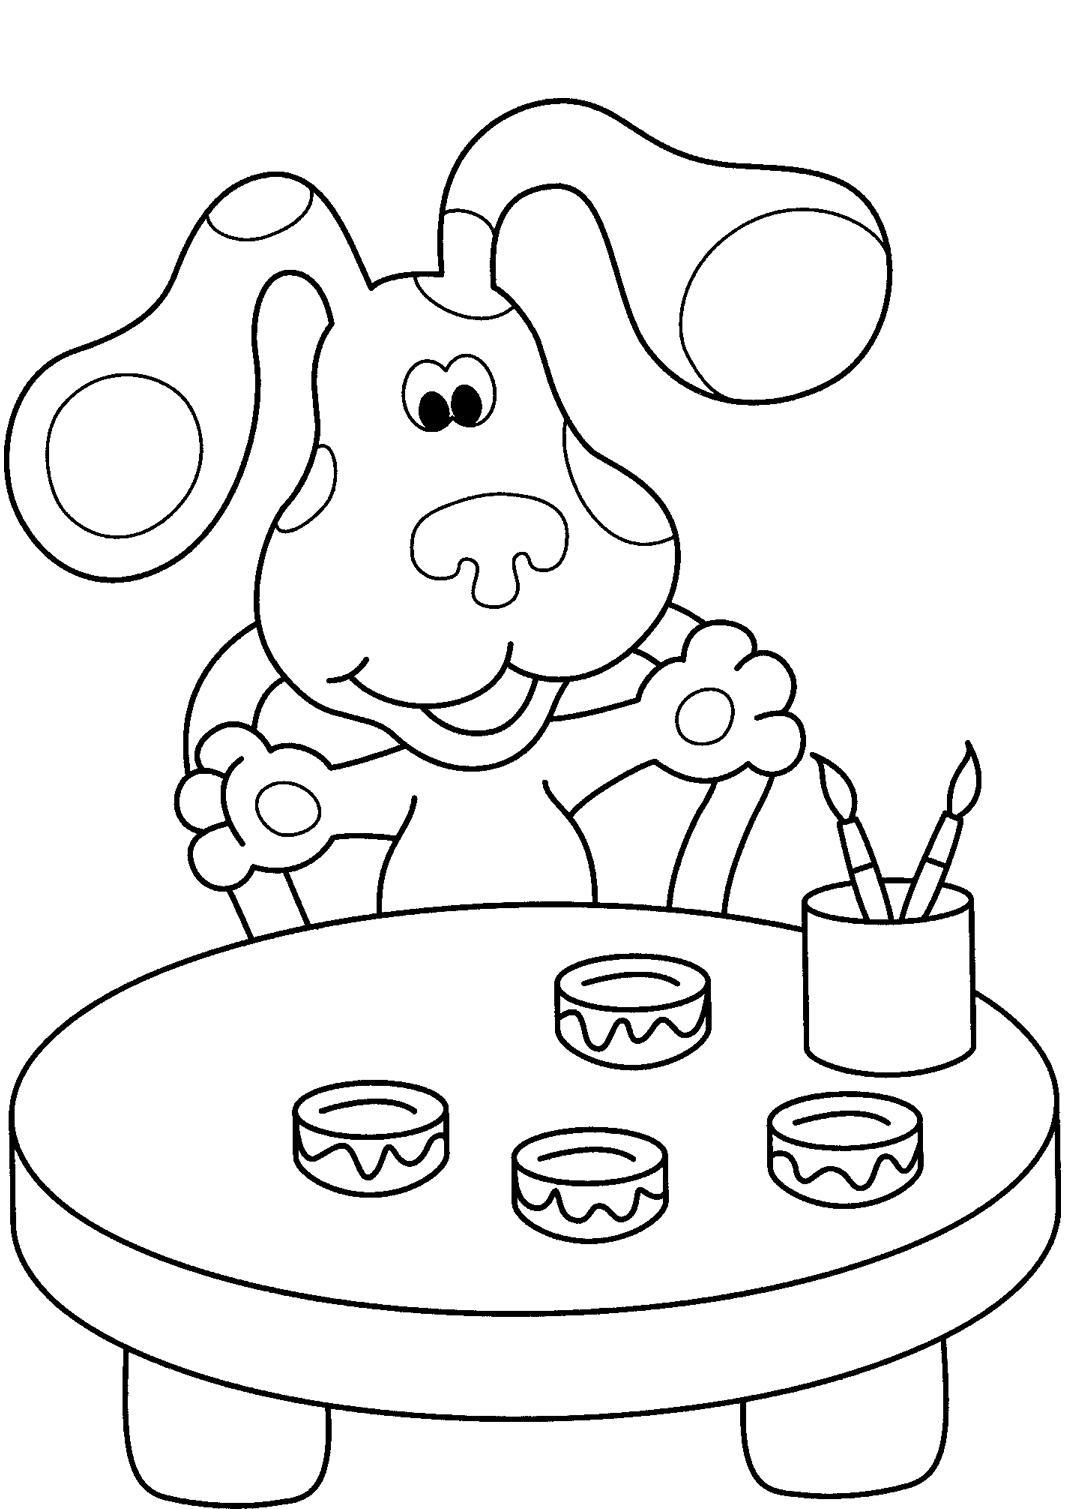 Free Blues Clues Blue and Sidetable Coloring Pages printable